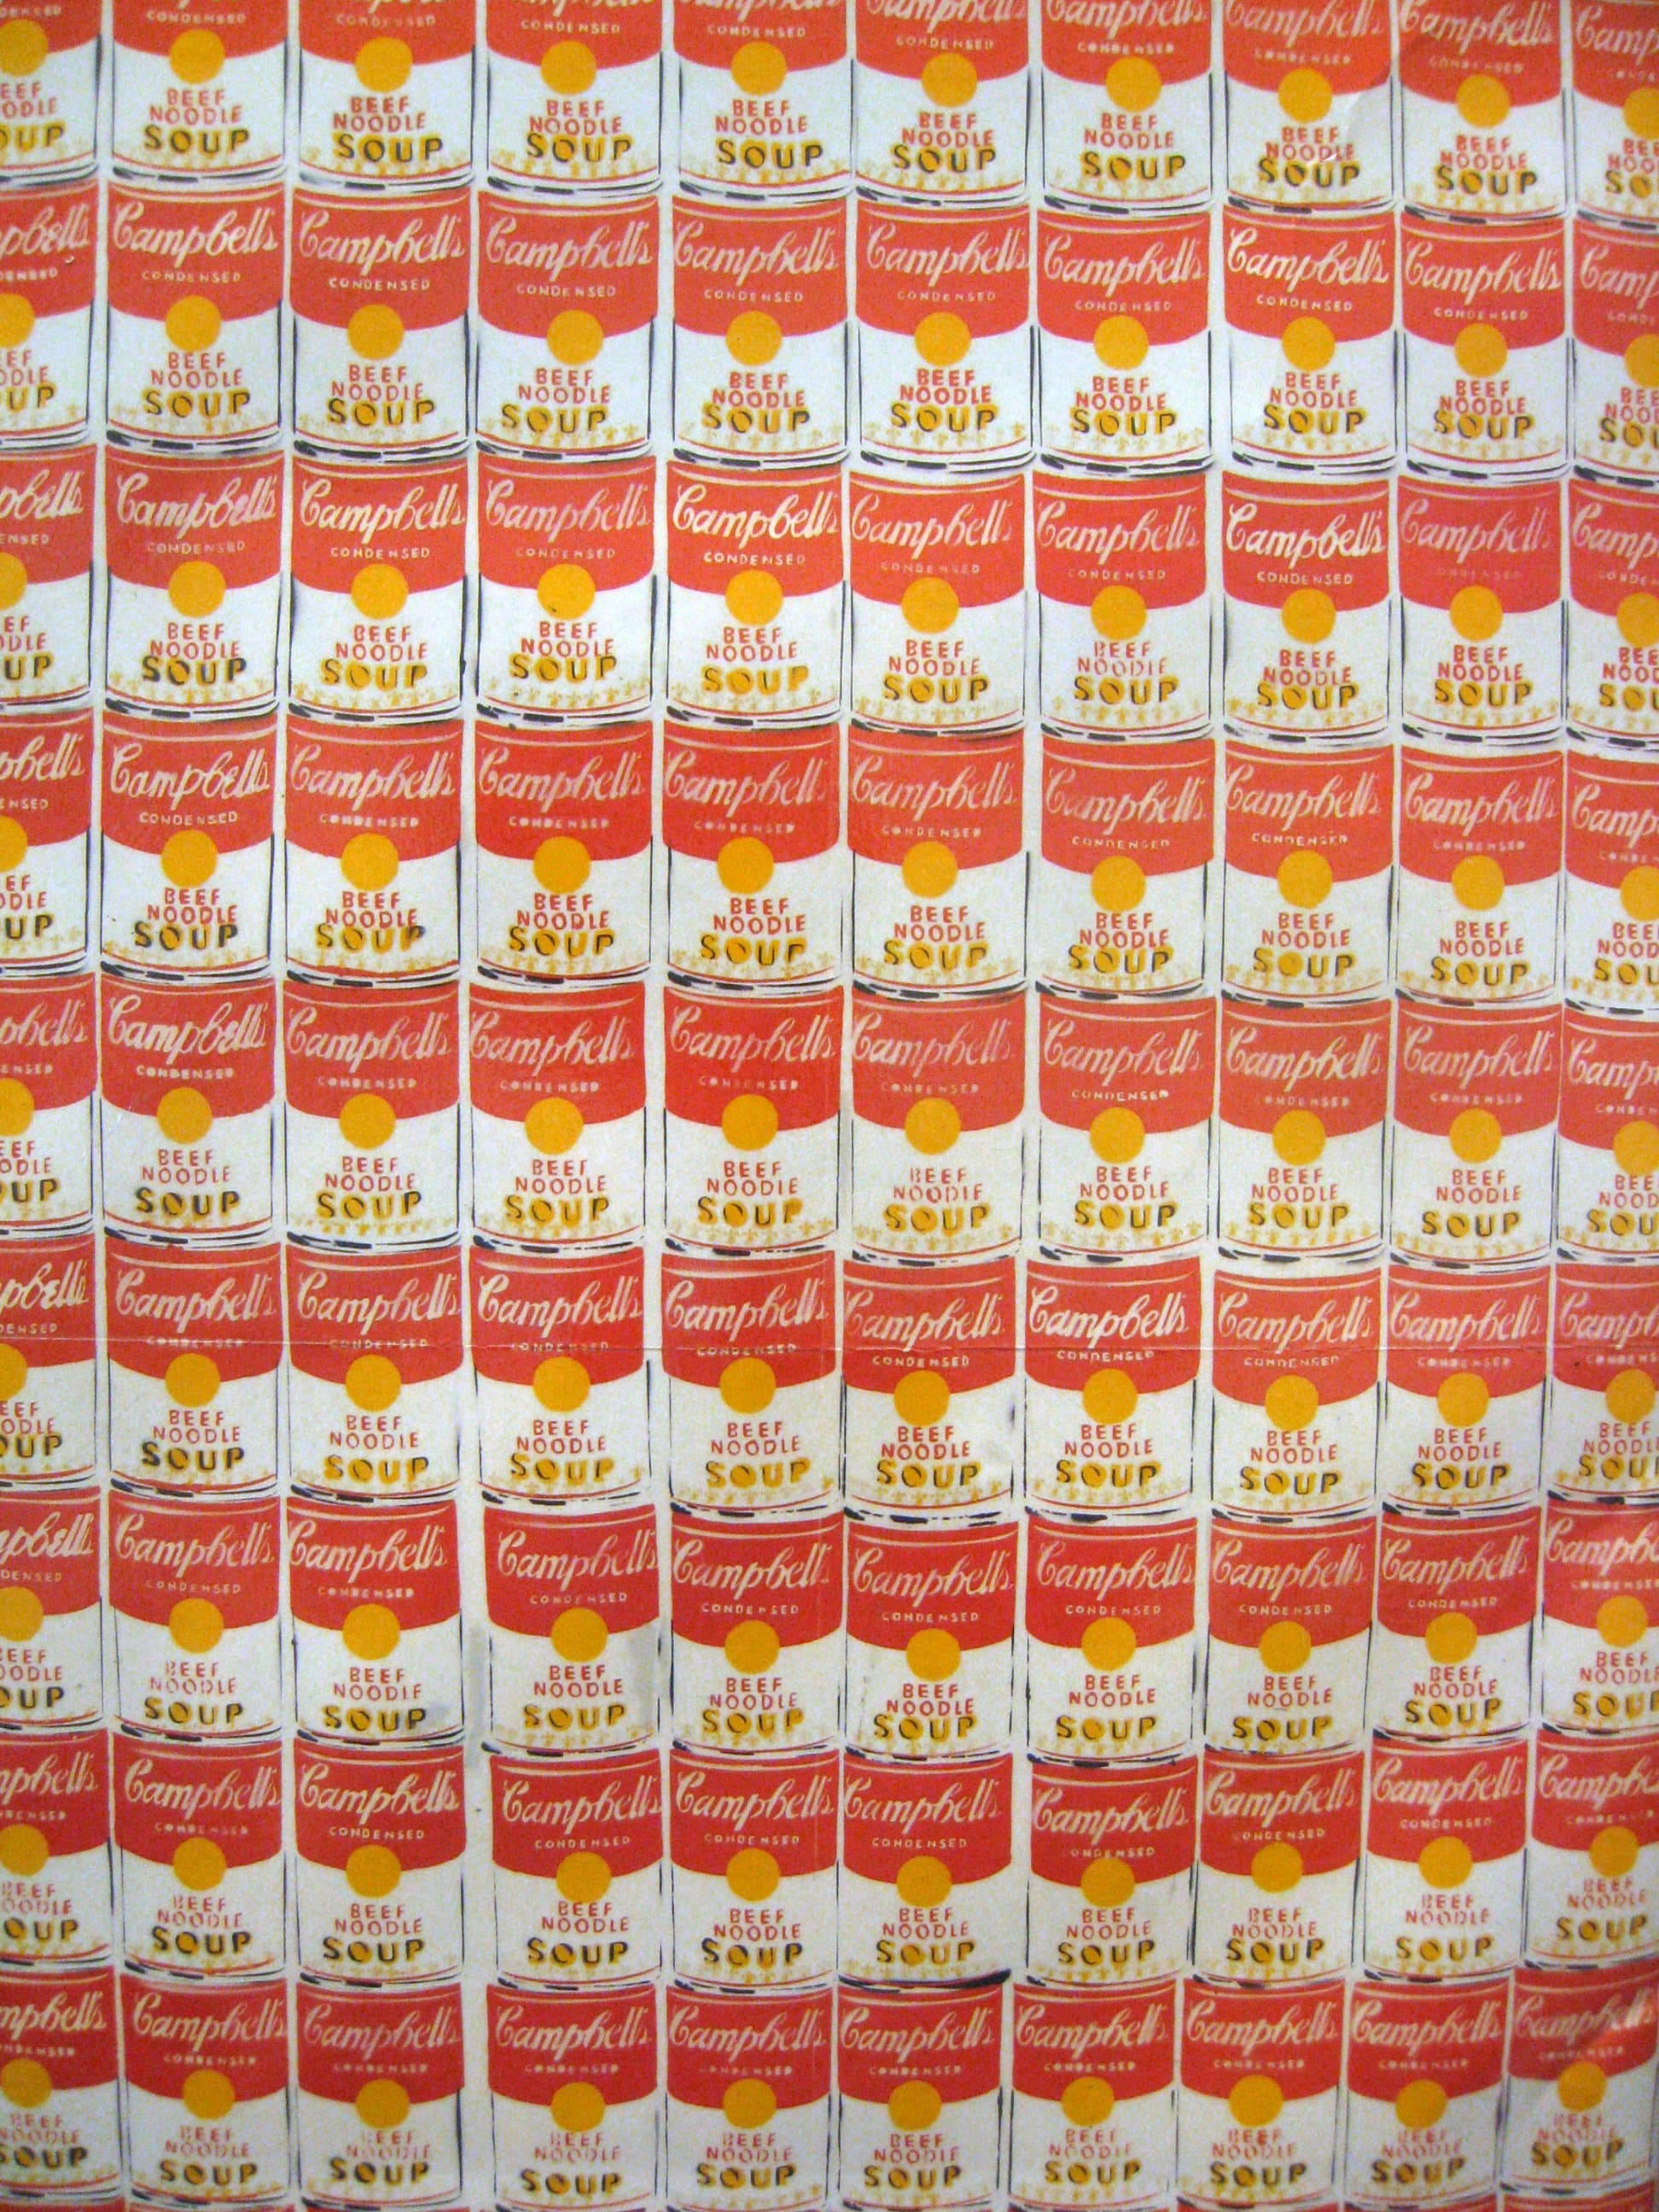 Andy Warhol 100 Campbell's Soup Cans - HD Wallpaper 